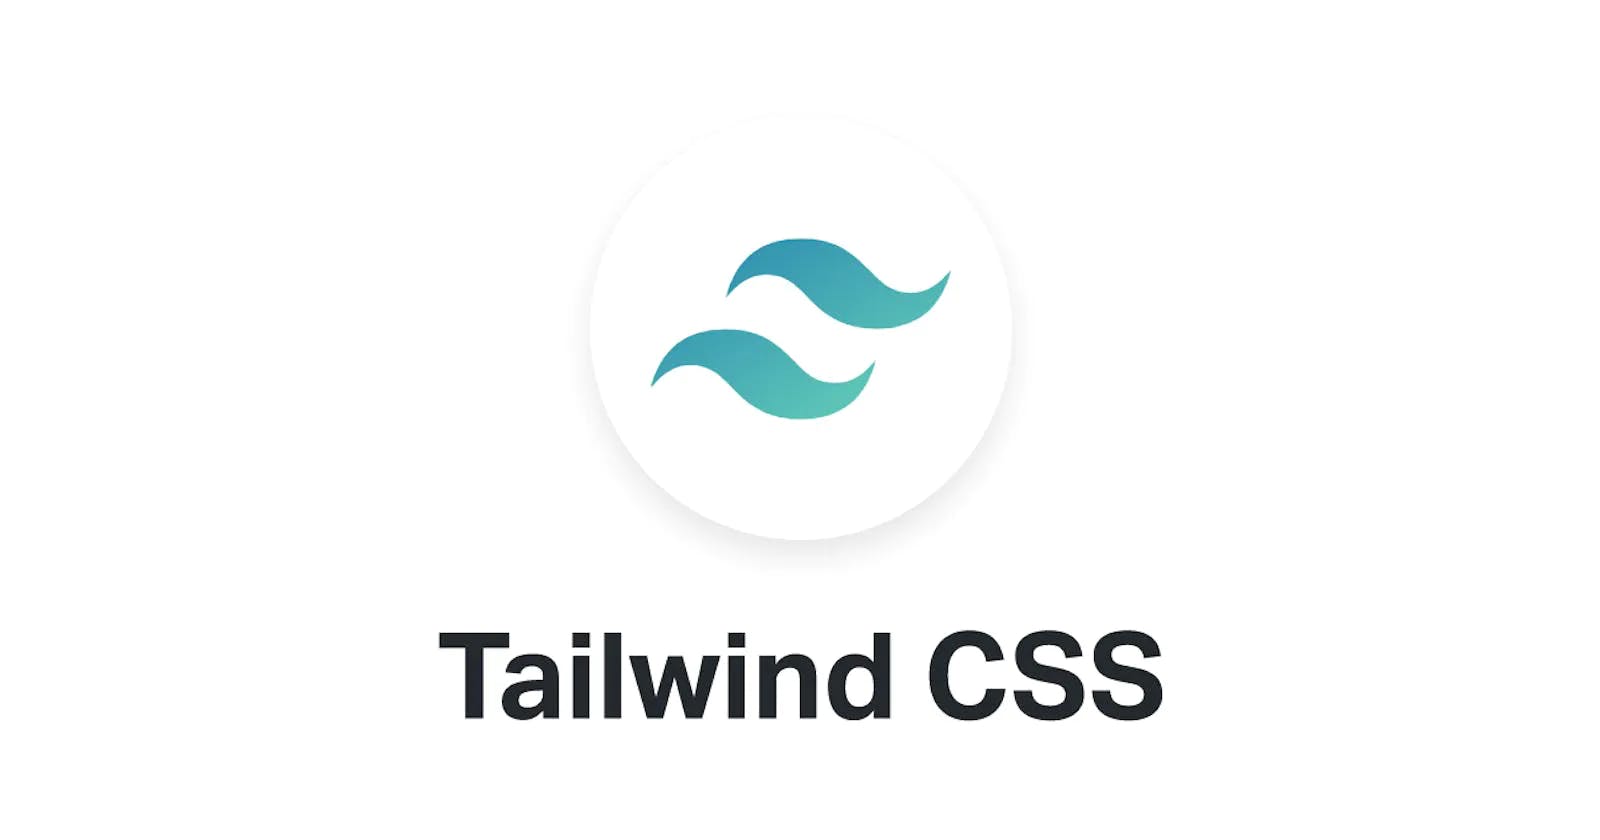 Why Tailwind CSS?